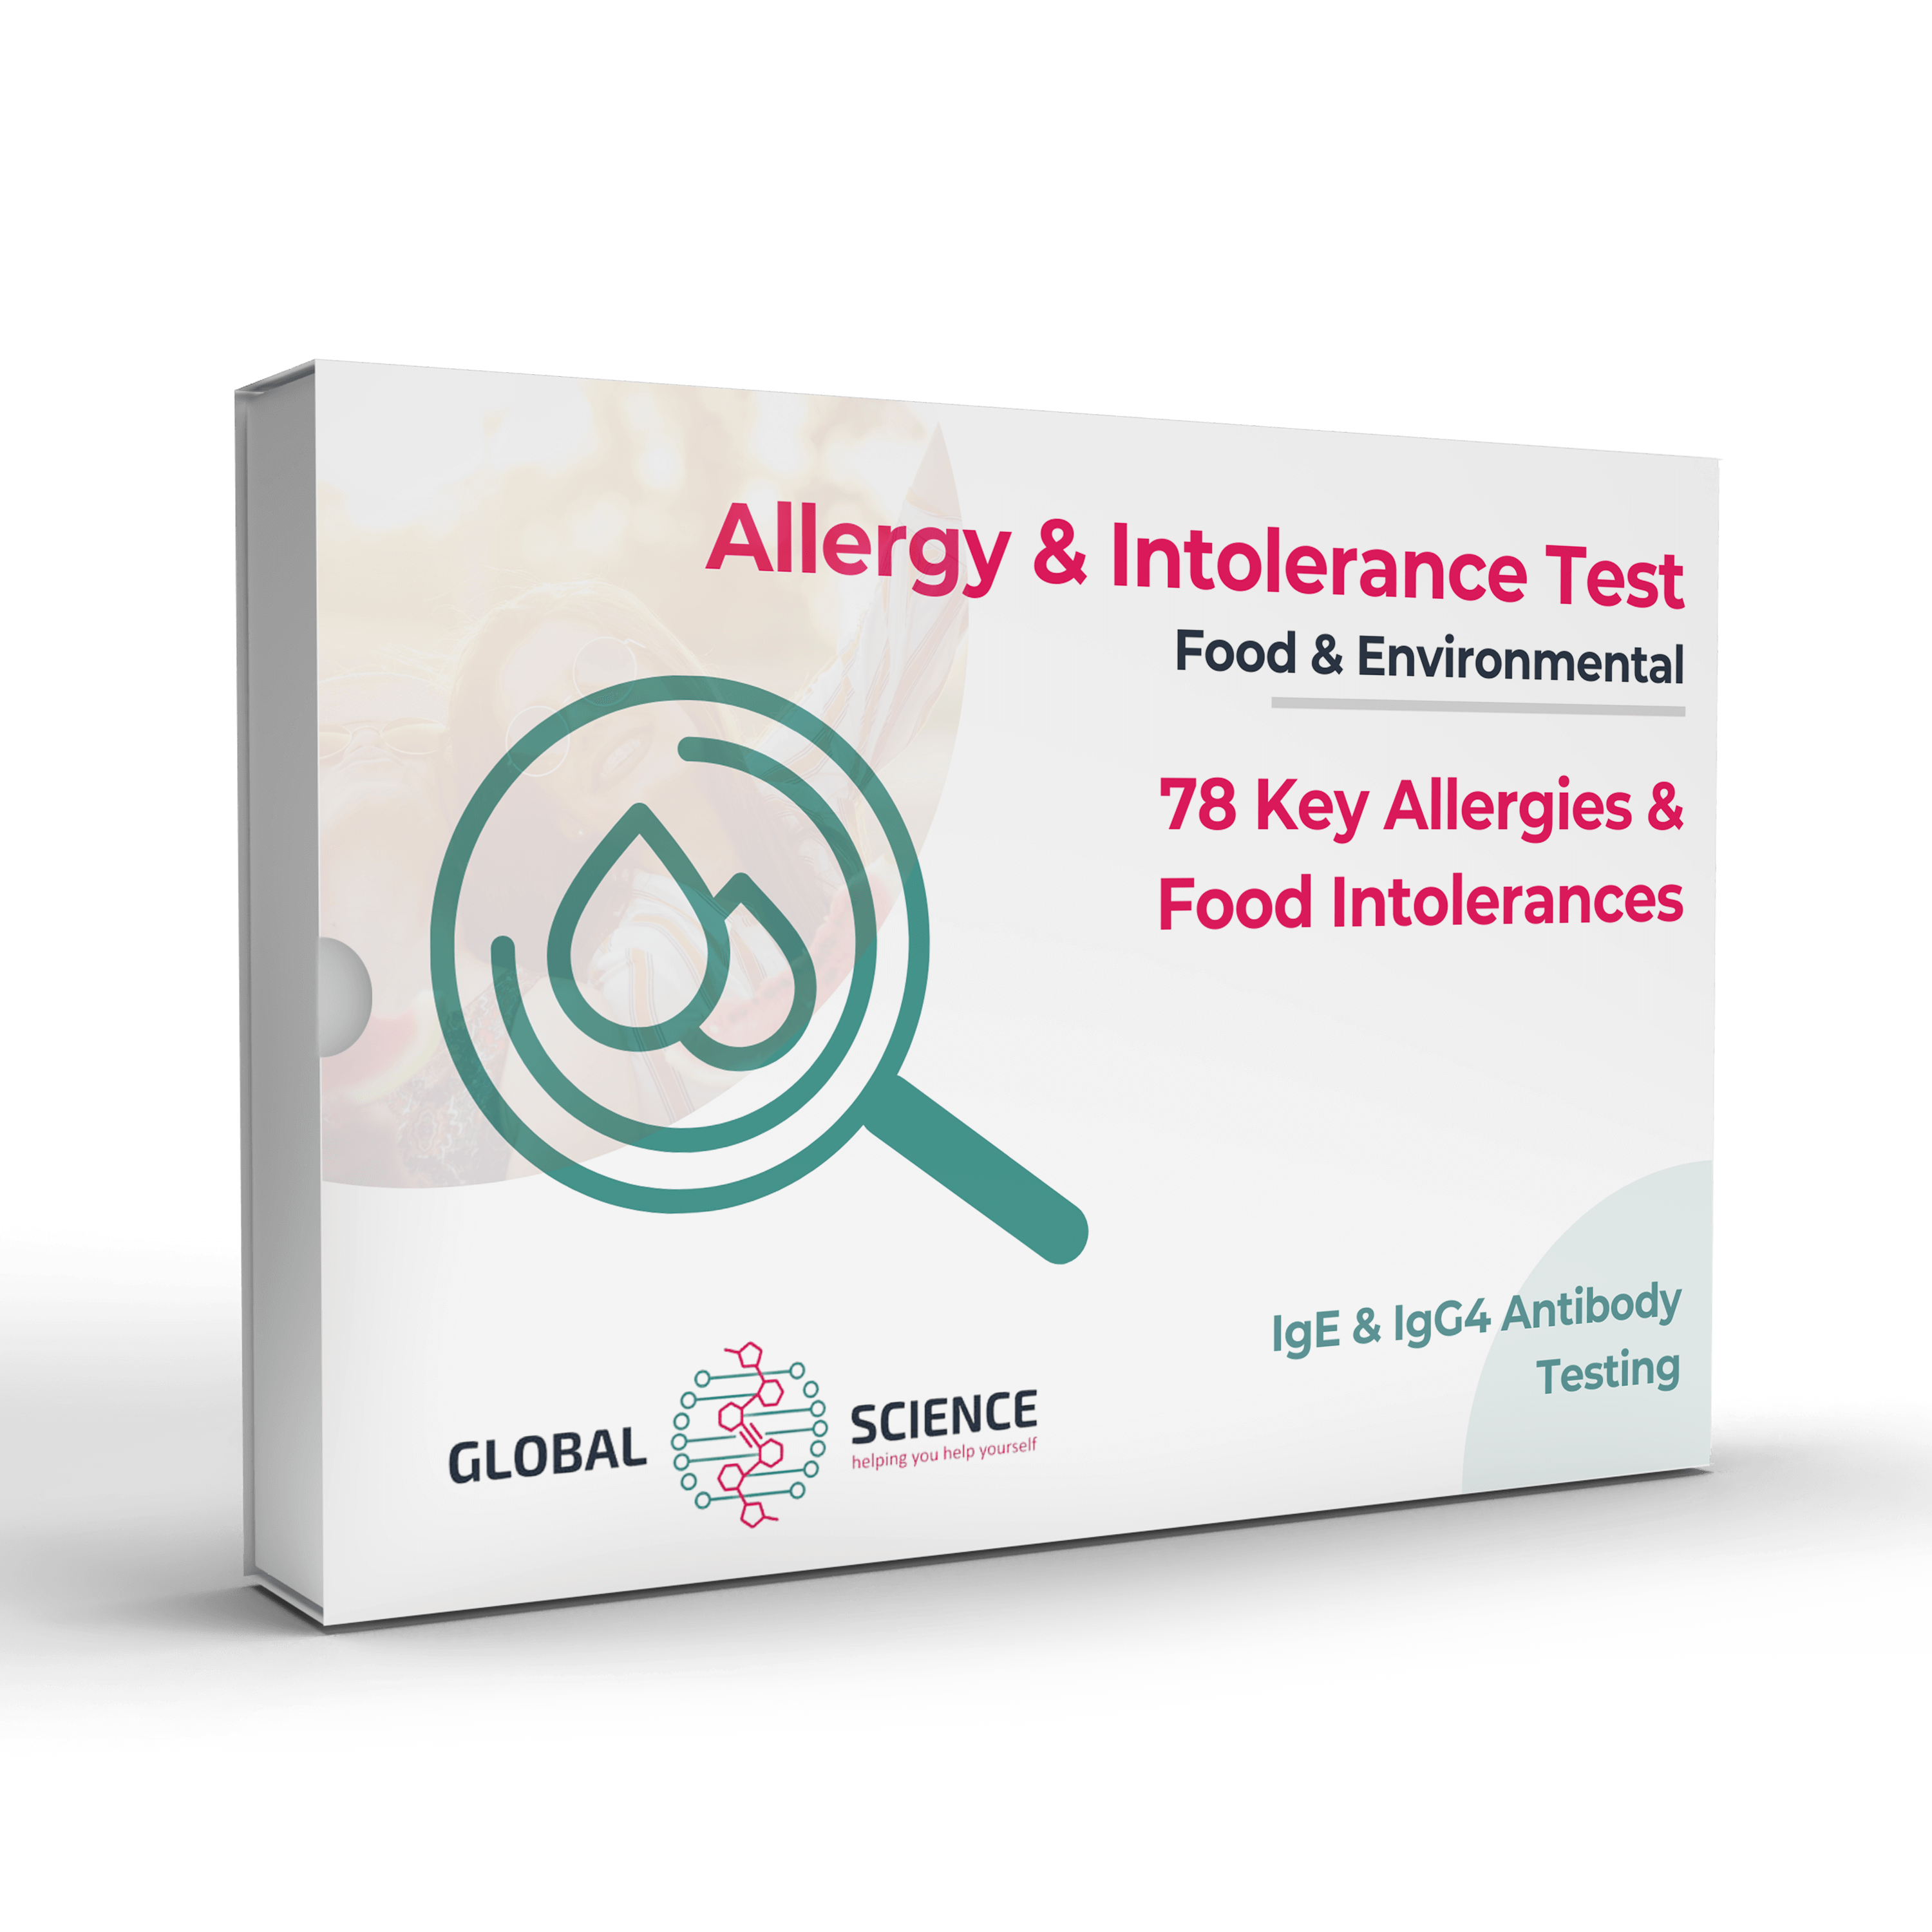 TMI TMA Allergy and Intolerance Test - How allergy check kits work